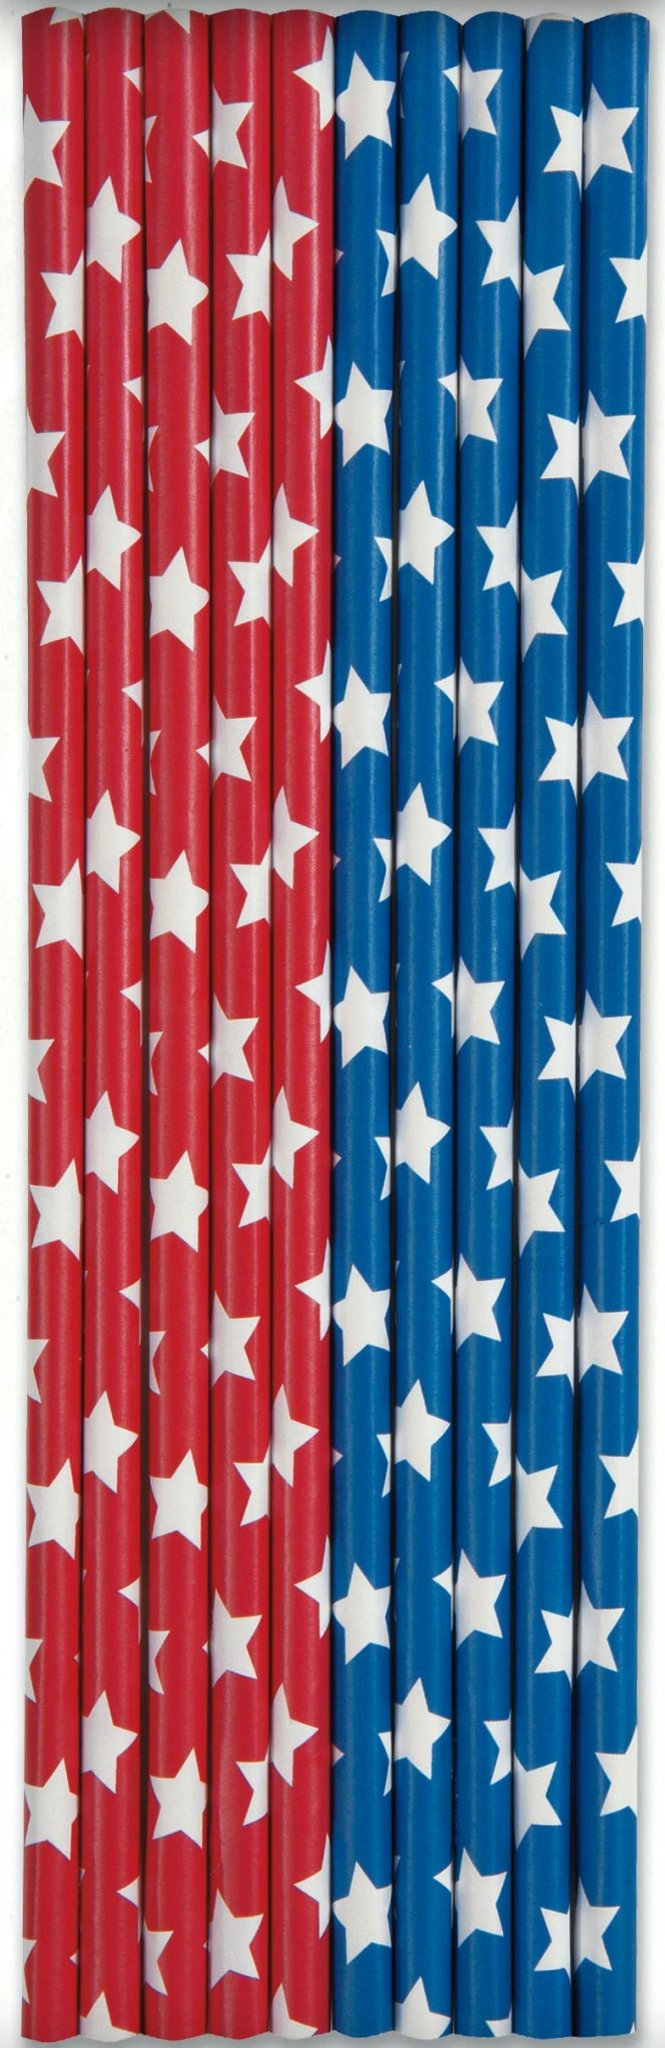 Blue & Red Patriotic Star Paper Straws - Stesha Party